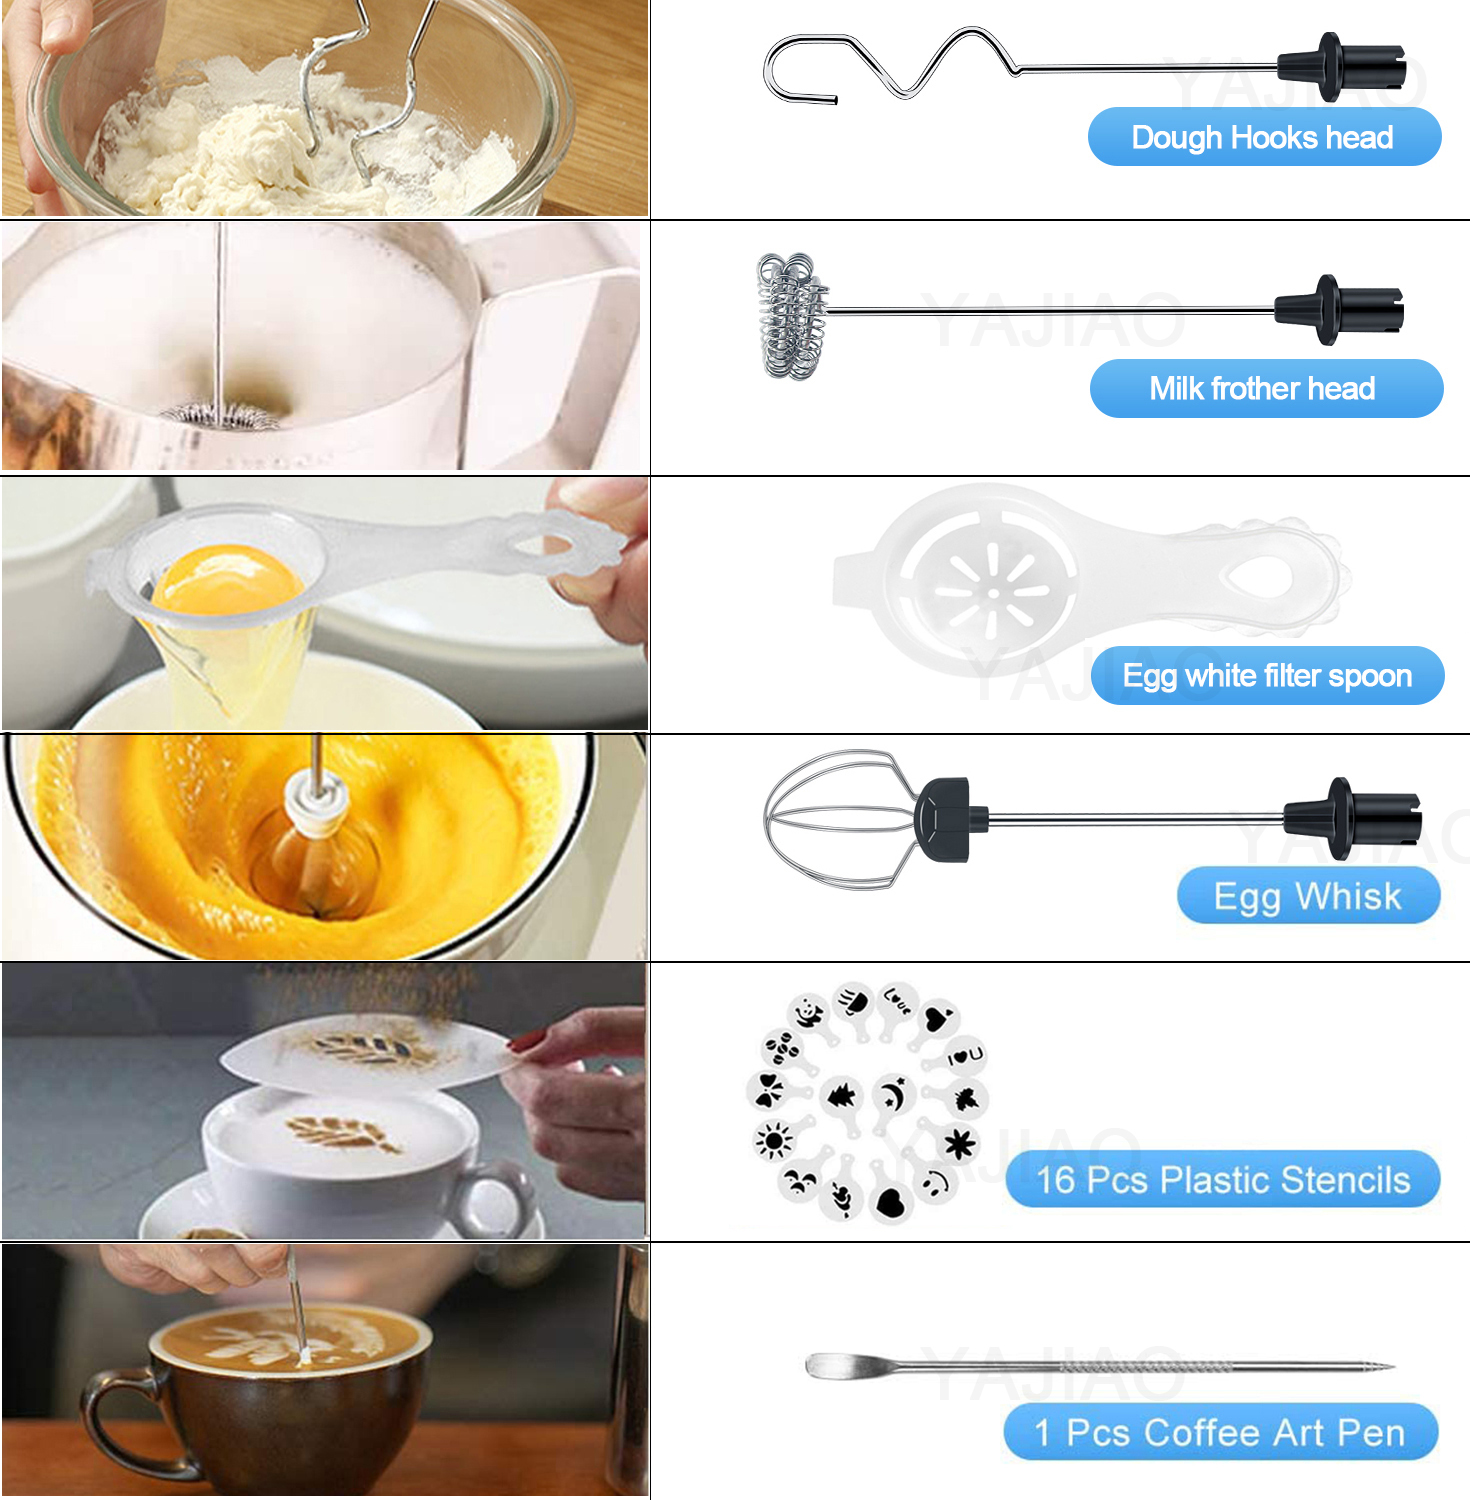 YAJIAO New Electric Mixer Blender Milk Frother Handheld With USB Charger Dock Stainless Bubble Maker Whisk For Coffee Cappuccino